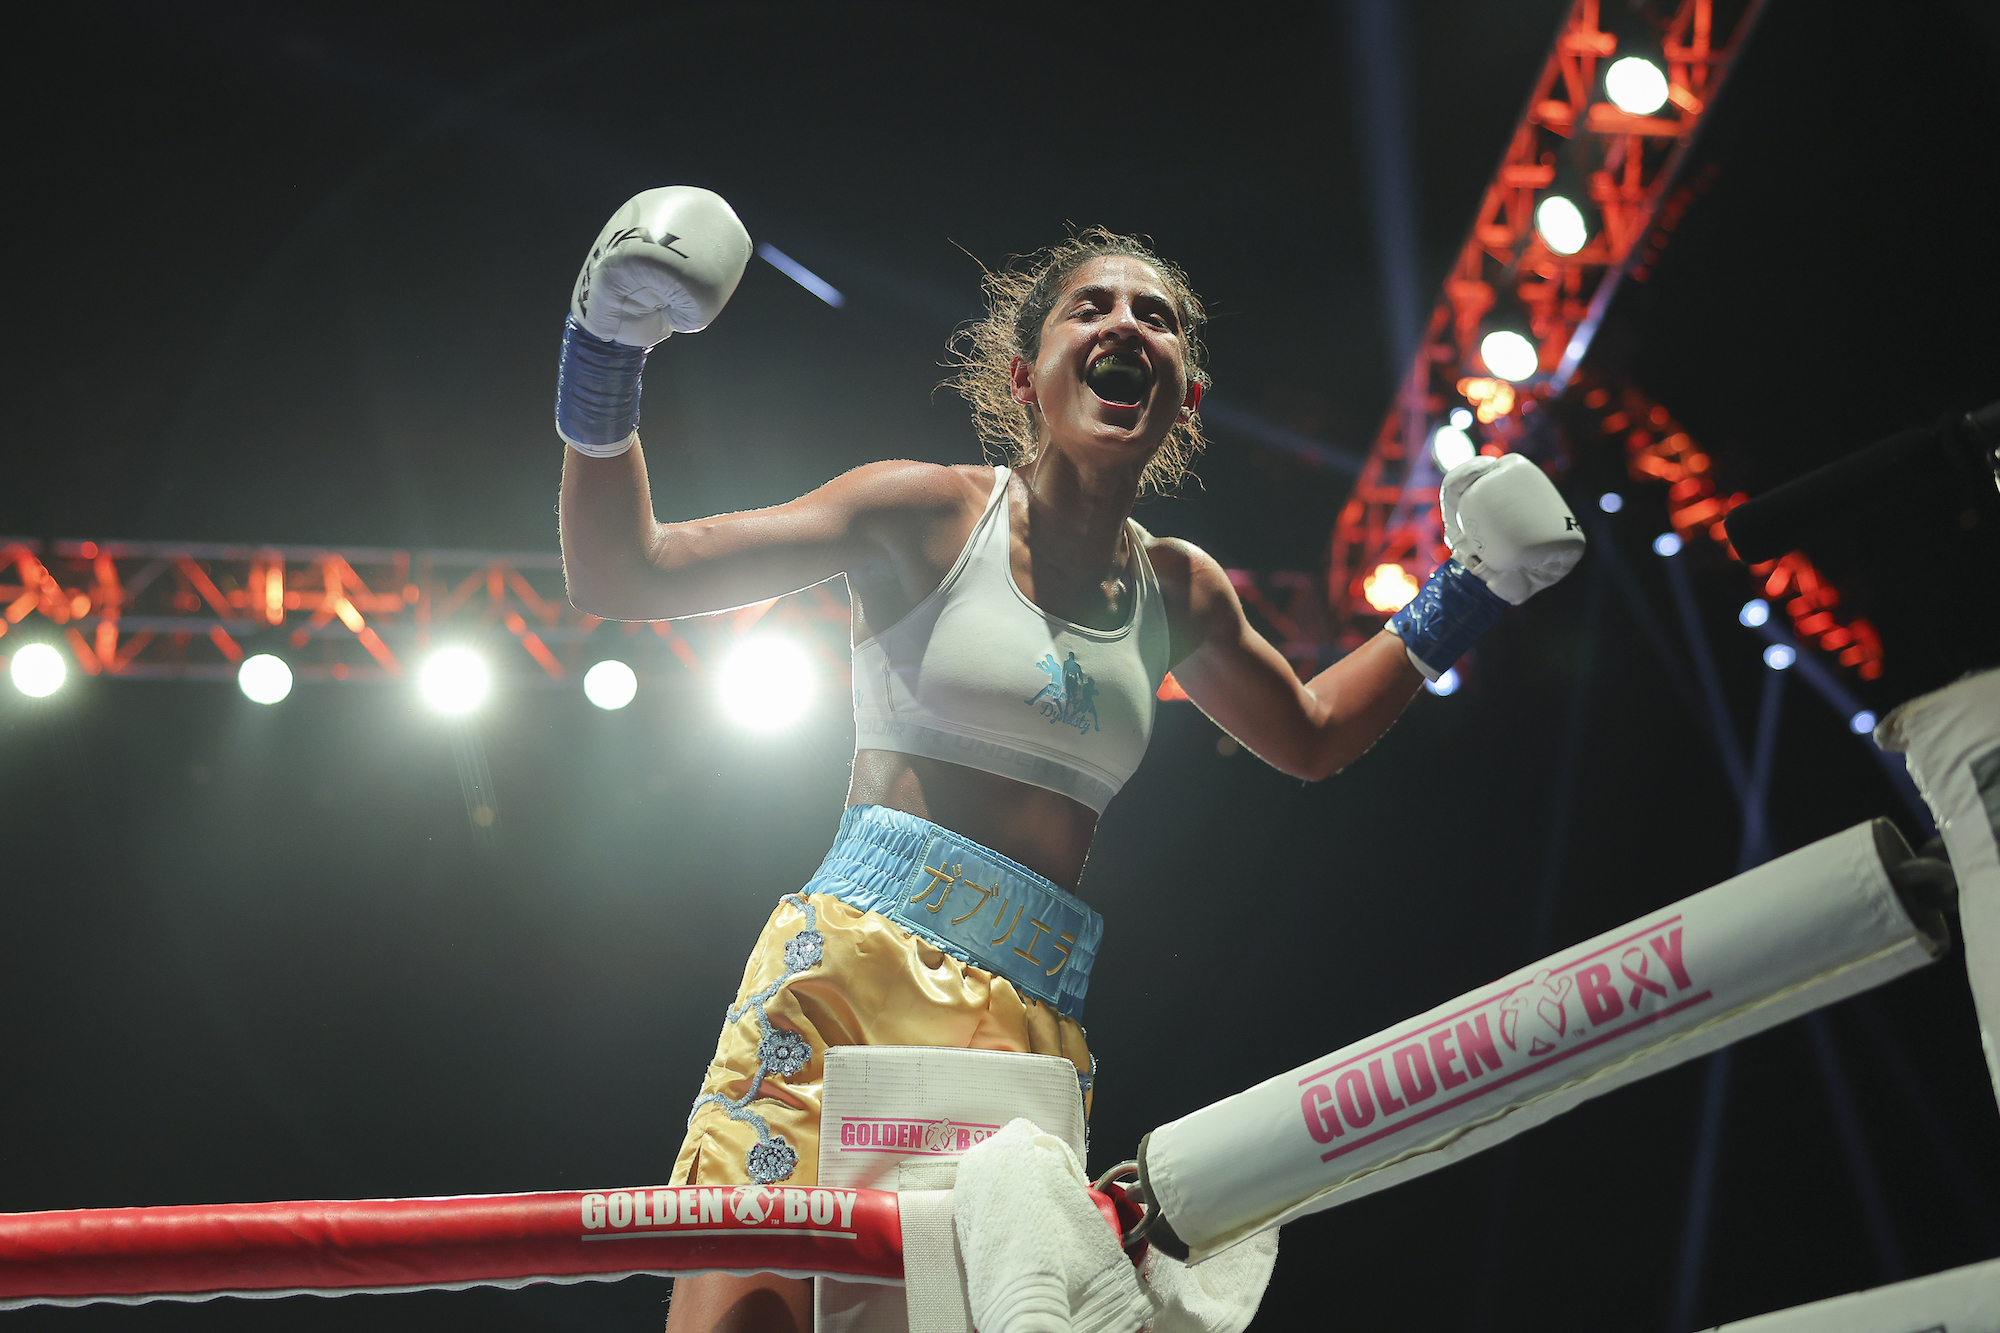 Gabriela Fundora wins her first world championship and local favorite 'Right Hook Roxy' makes her debut at Golden Boy's Inglewood show